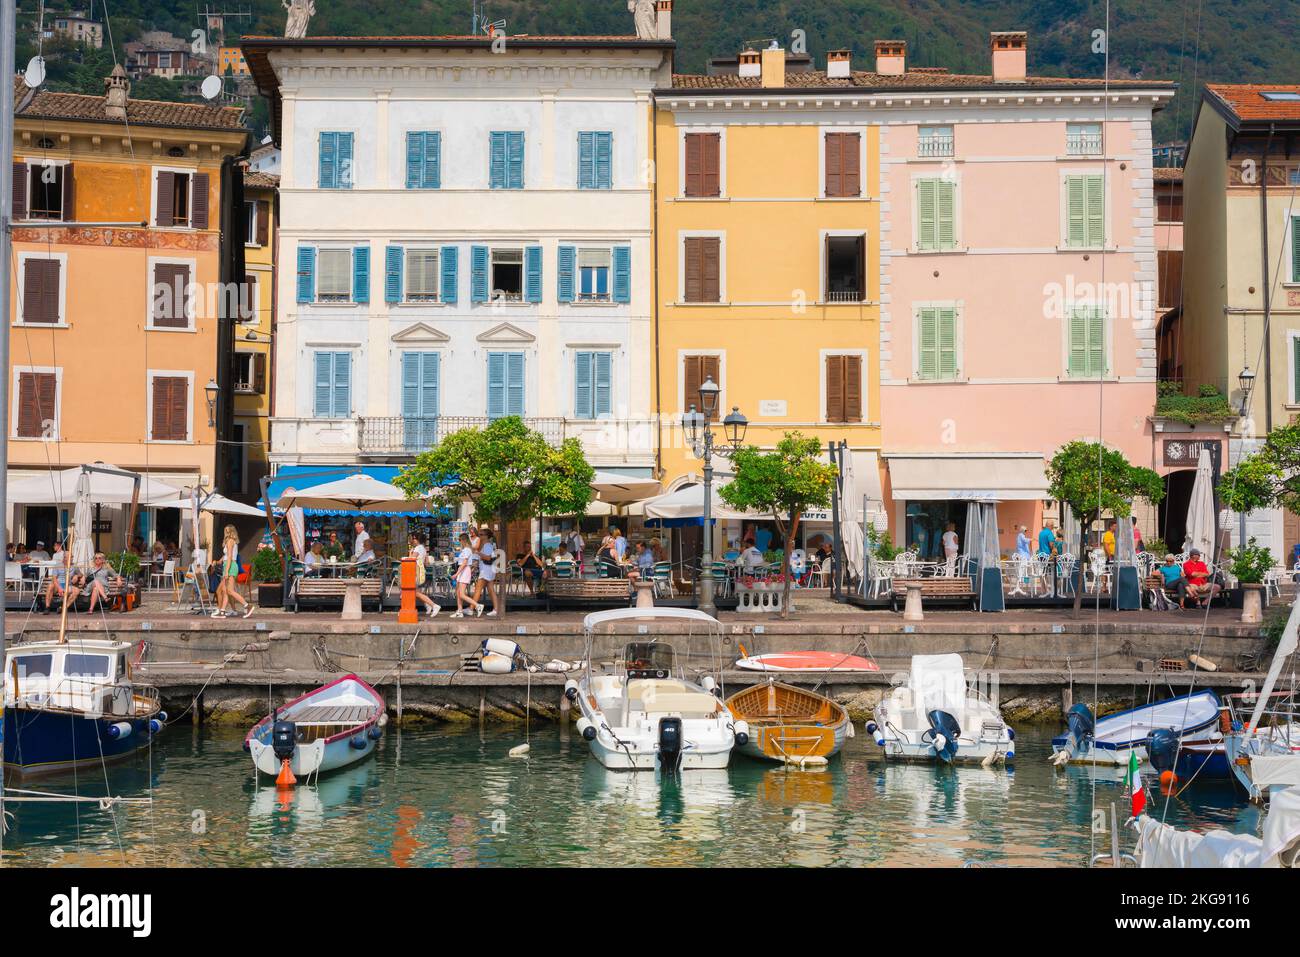 Gargnano Lake Garda, view in summer of the scenic harbour area in the lakeside town of Gargnano, Lombardy, Italy Stock Photo